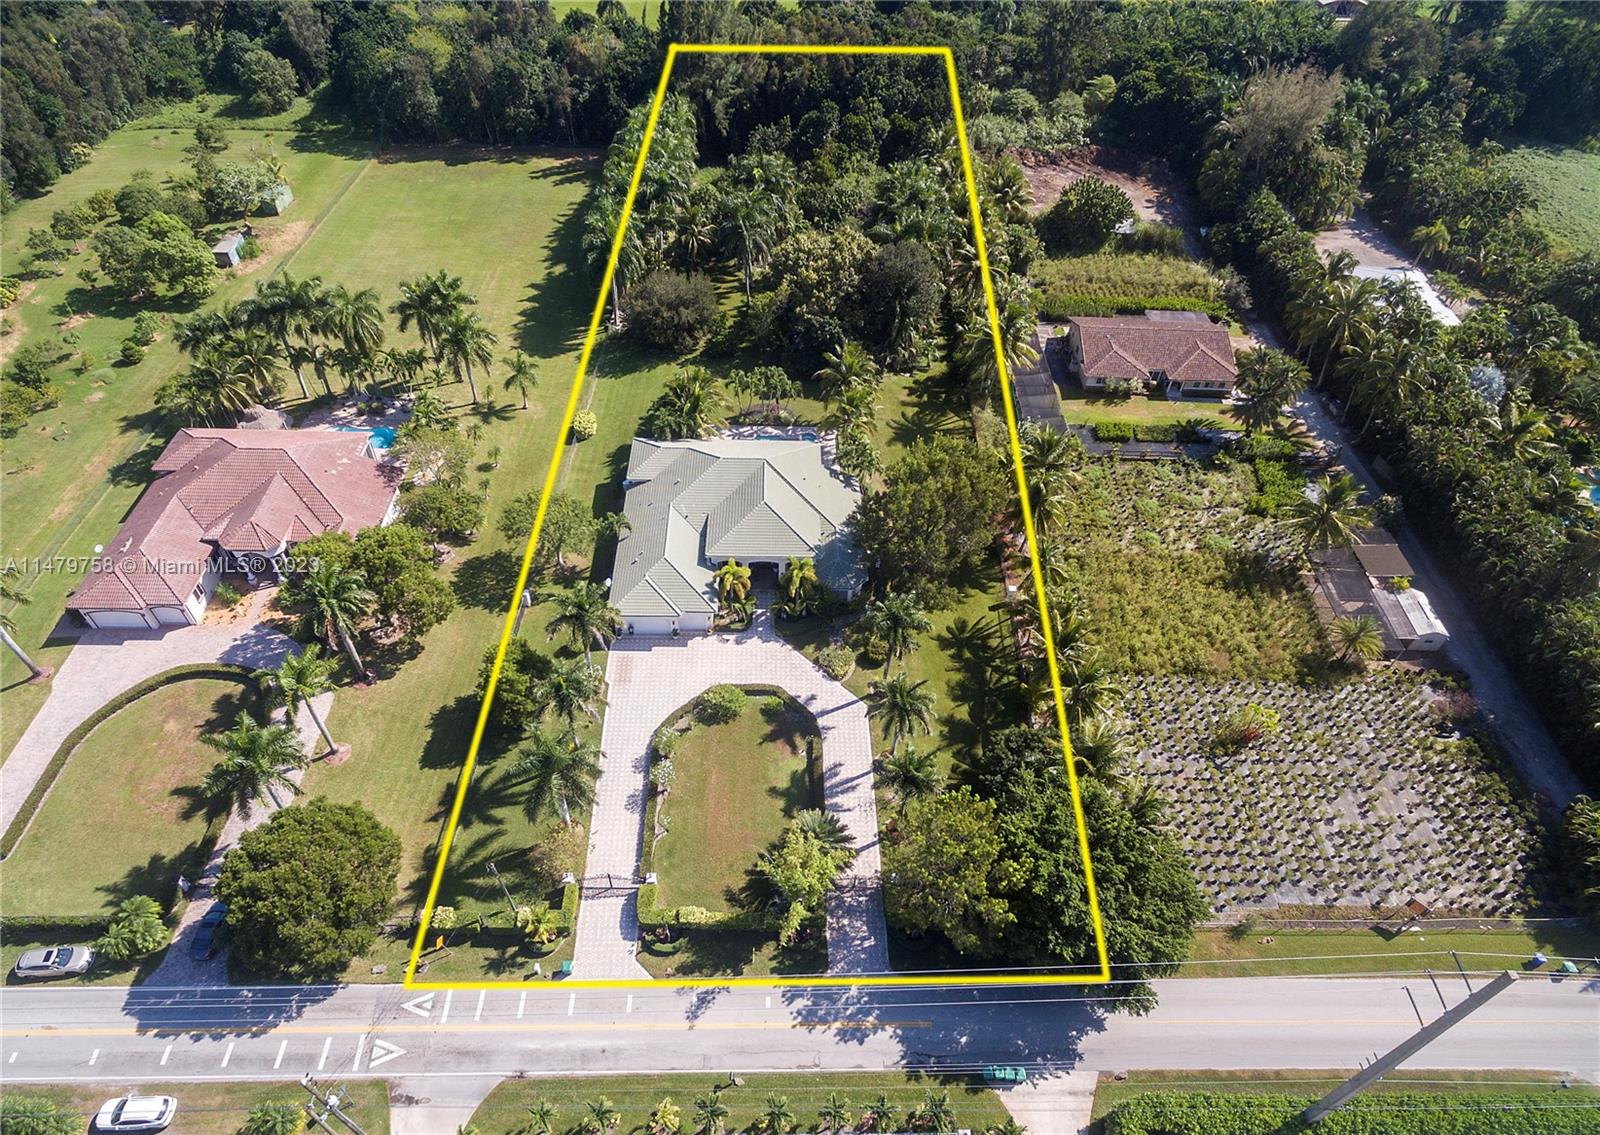 6910 SW 185th Way, Southwest Ranches, Florida 33332, 4 Bedrooms Bedrooms, ,4 BathroomsBathrooms,Residential,For Sale,6910 SW 185th Way,A11479758